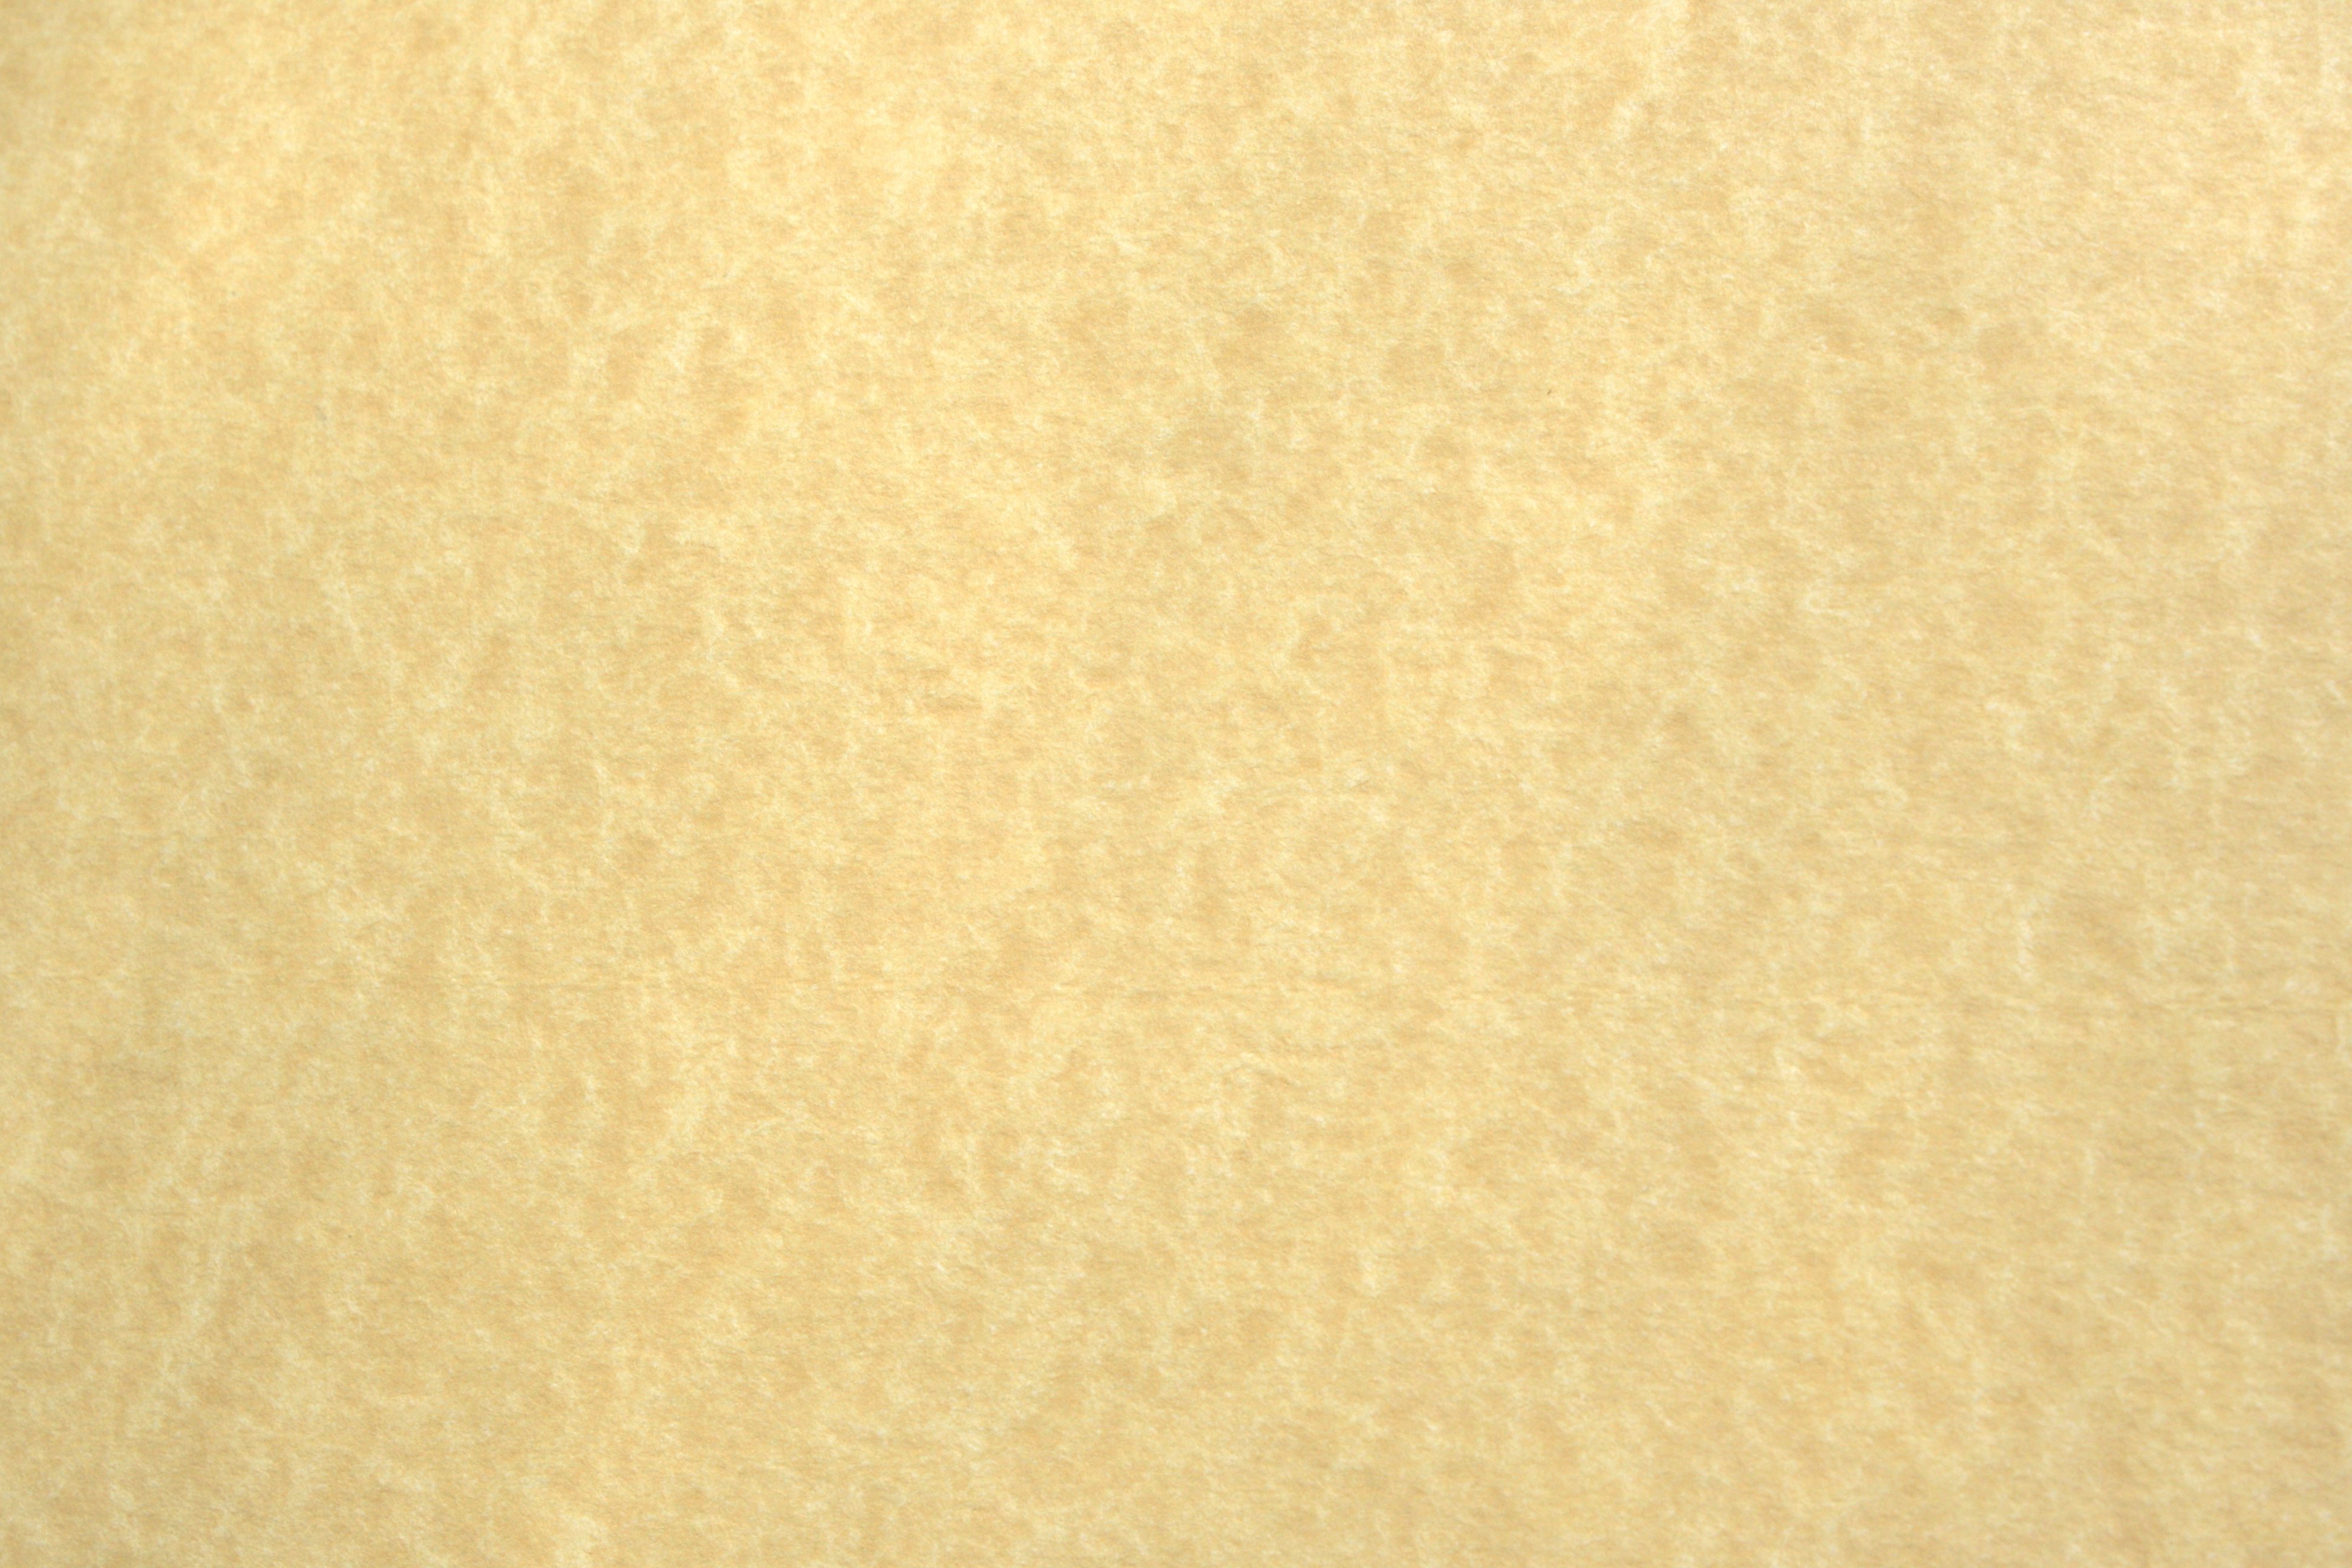 Light Colored Parchment Paper Texture High Resolution Photo